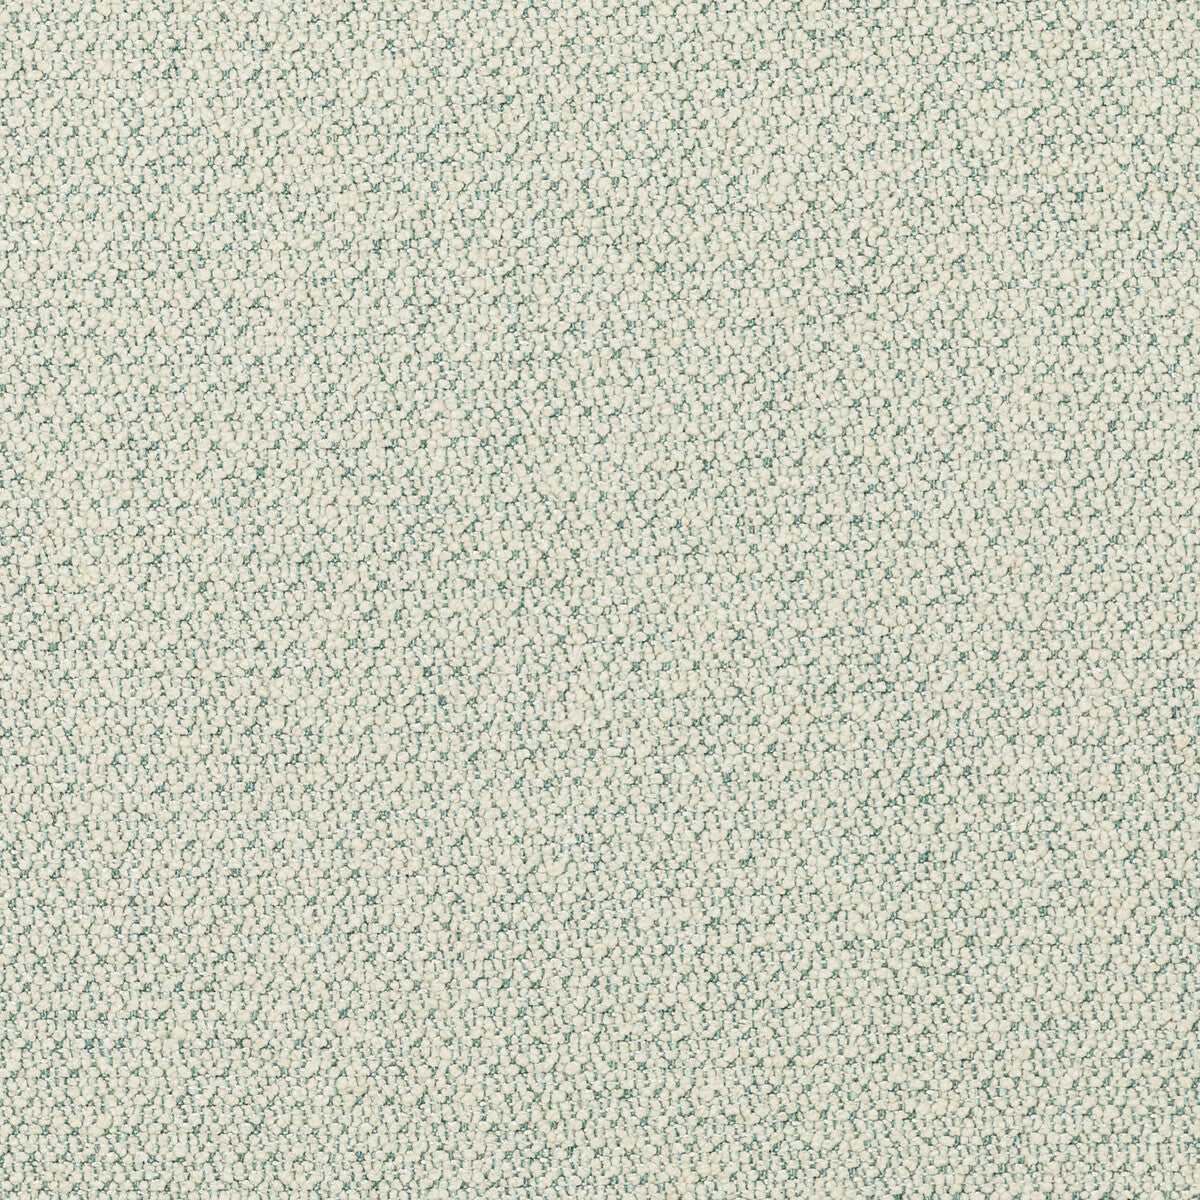 Bali Boucle fabric in soft aqua color - pattern 36051.135.0 - by Kravet Couture in the Luxury Textures II collection